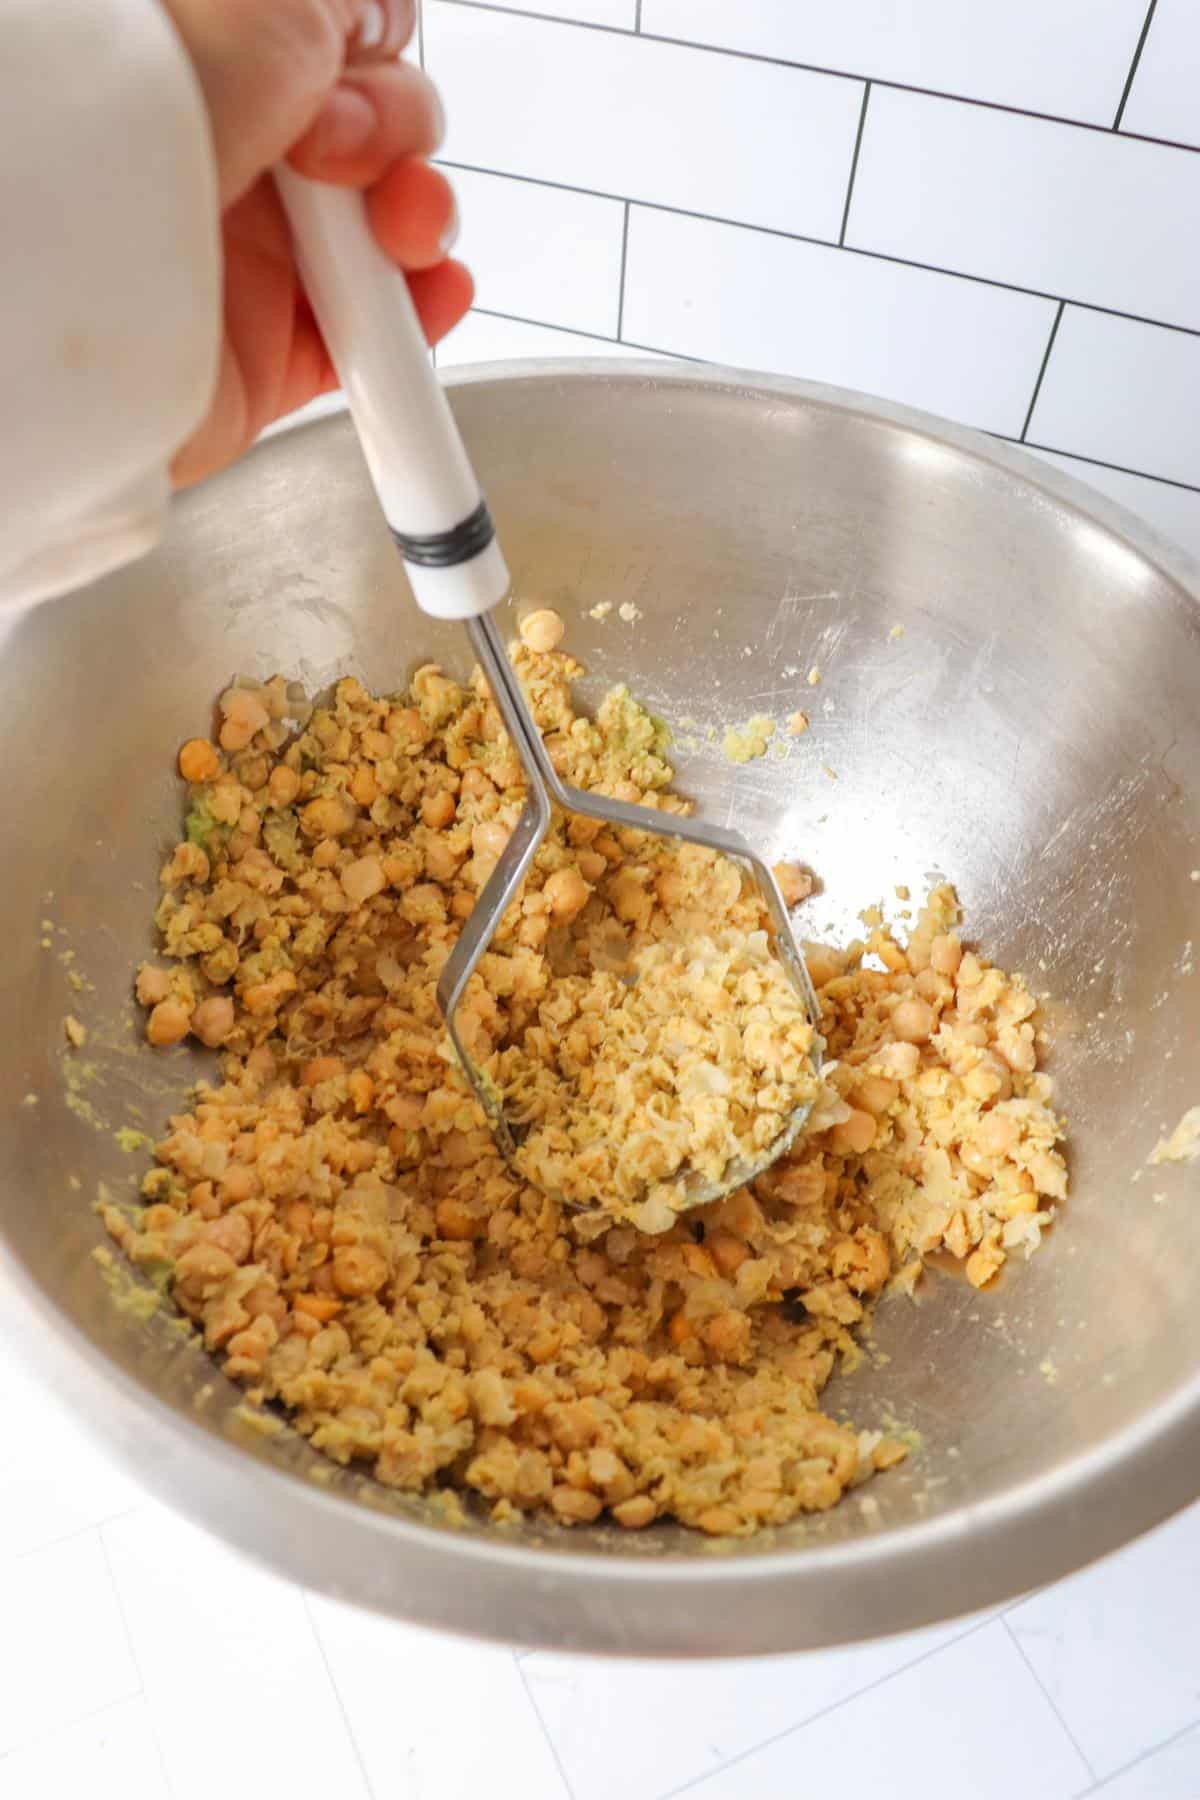 Hand using a potato masher to mash chickpeas in a large mixing bowl.